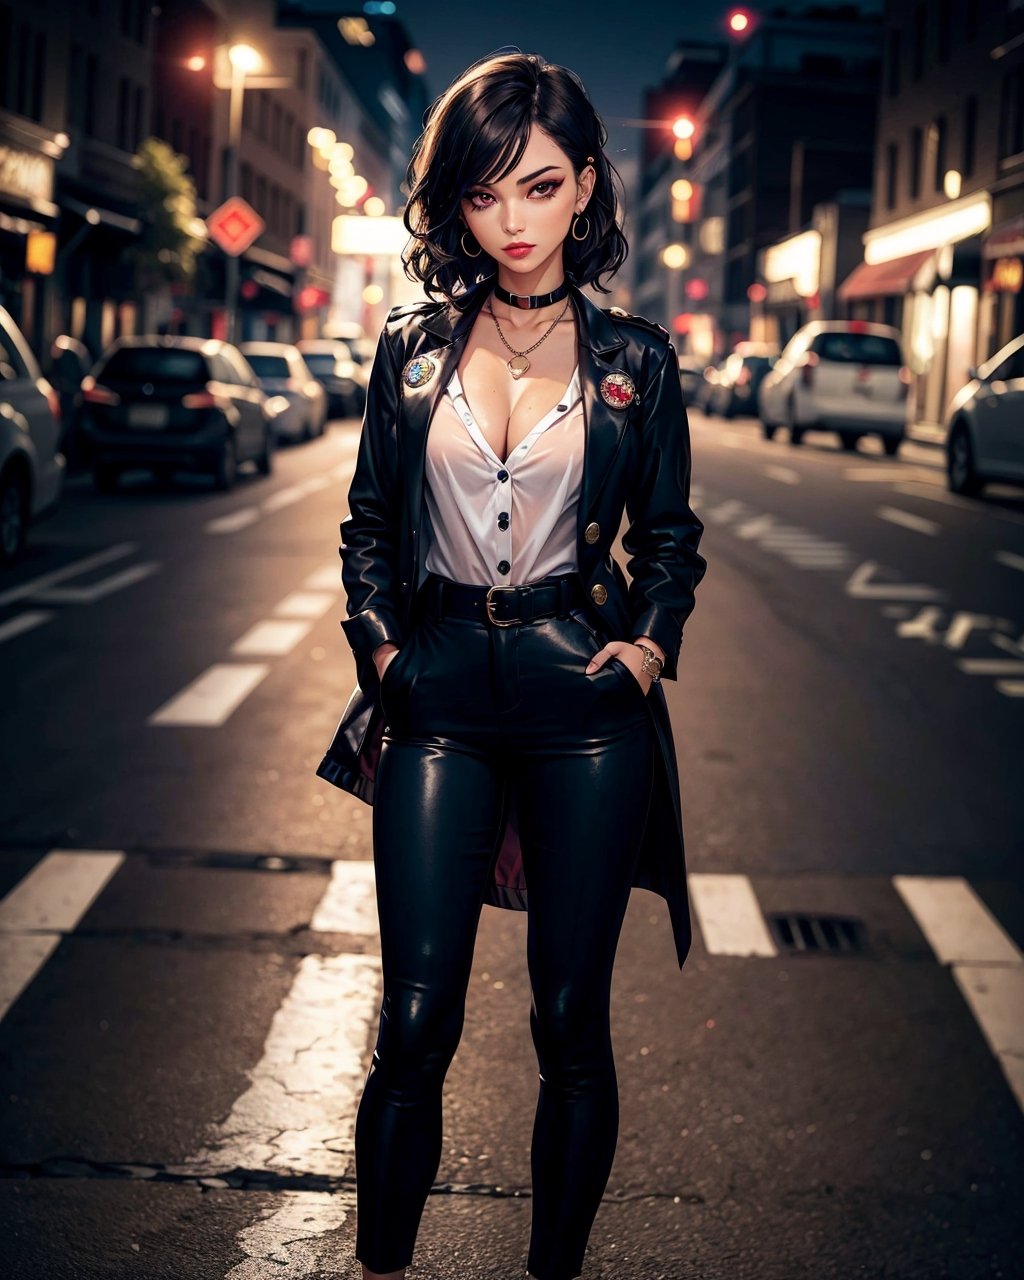 beautiful woman, middle breasts, detective, black jacket, white shirt, serious, short wavy hair, hands in pockets, looks to the sides, lipsticks, first button undone, neckline, black heeled shoes, street, inspector badge, rotating beacon lights, intense look, bright eyes, red eyes, ear piercings, classy, elegant, sensual, attractive, perfect, makeup, feminine, cute, sexy